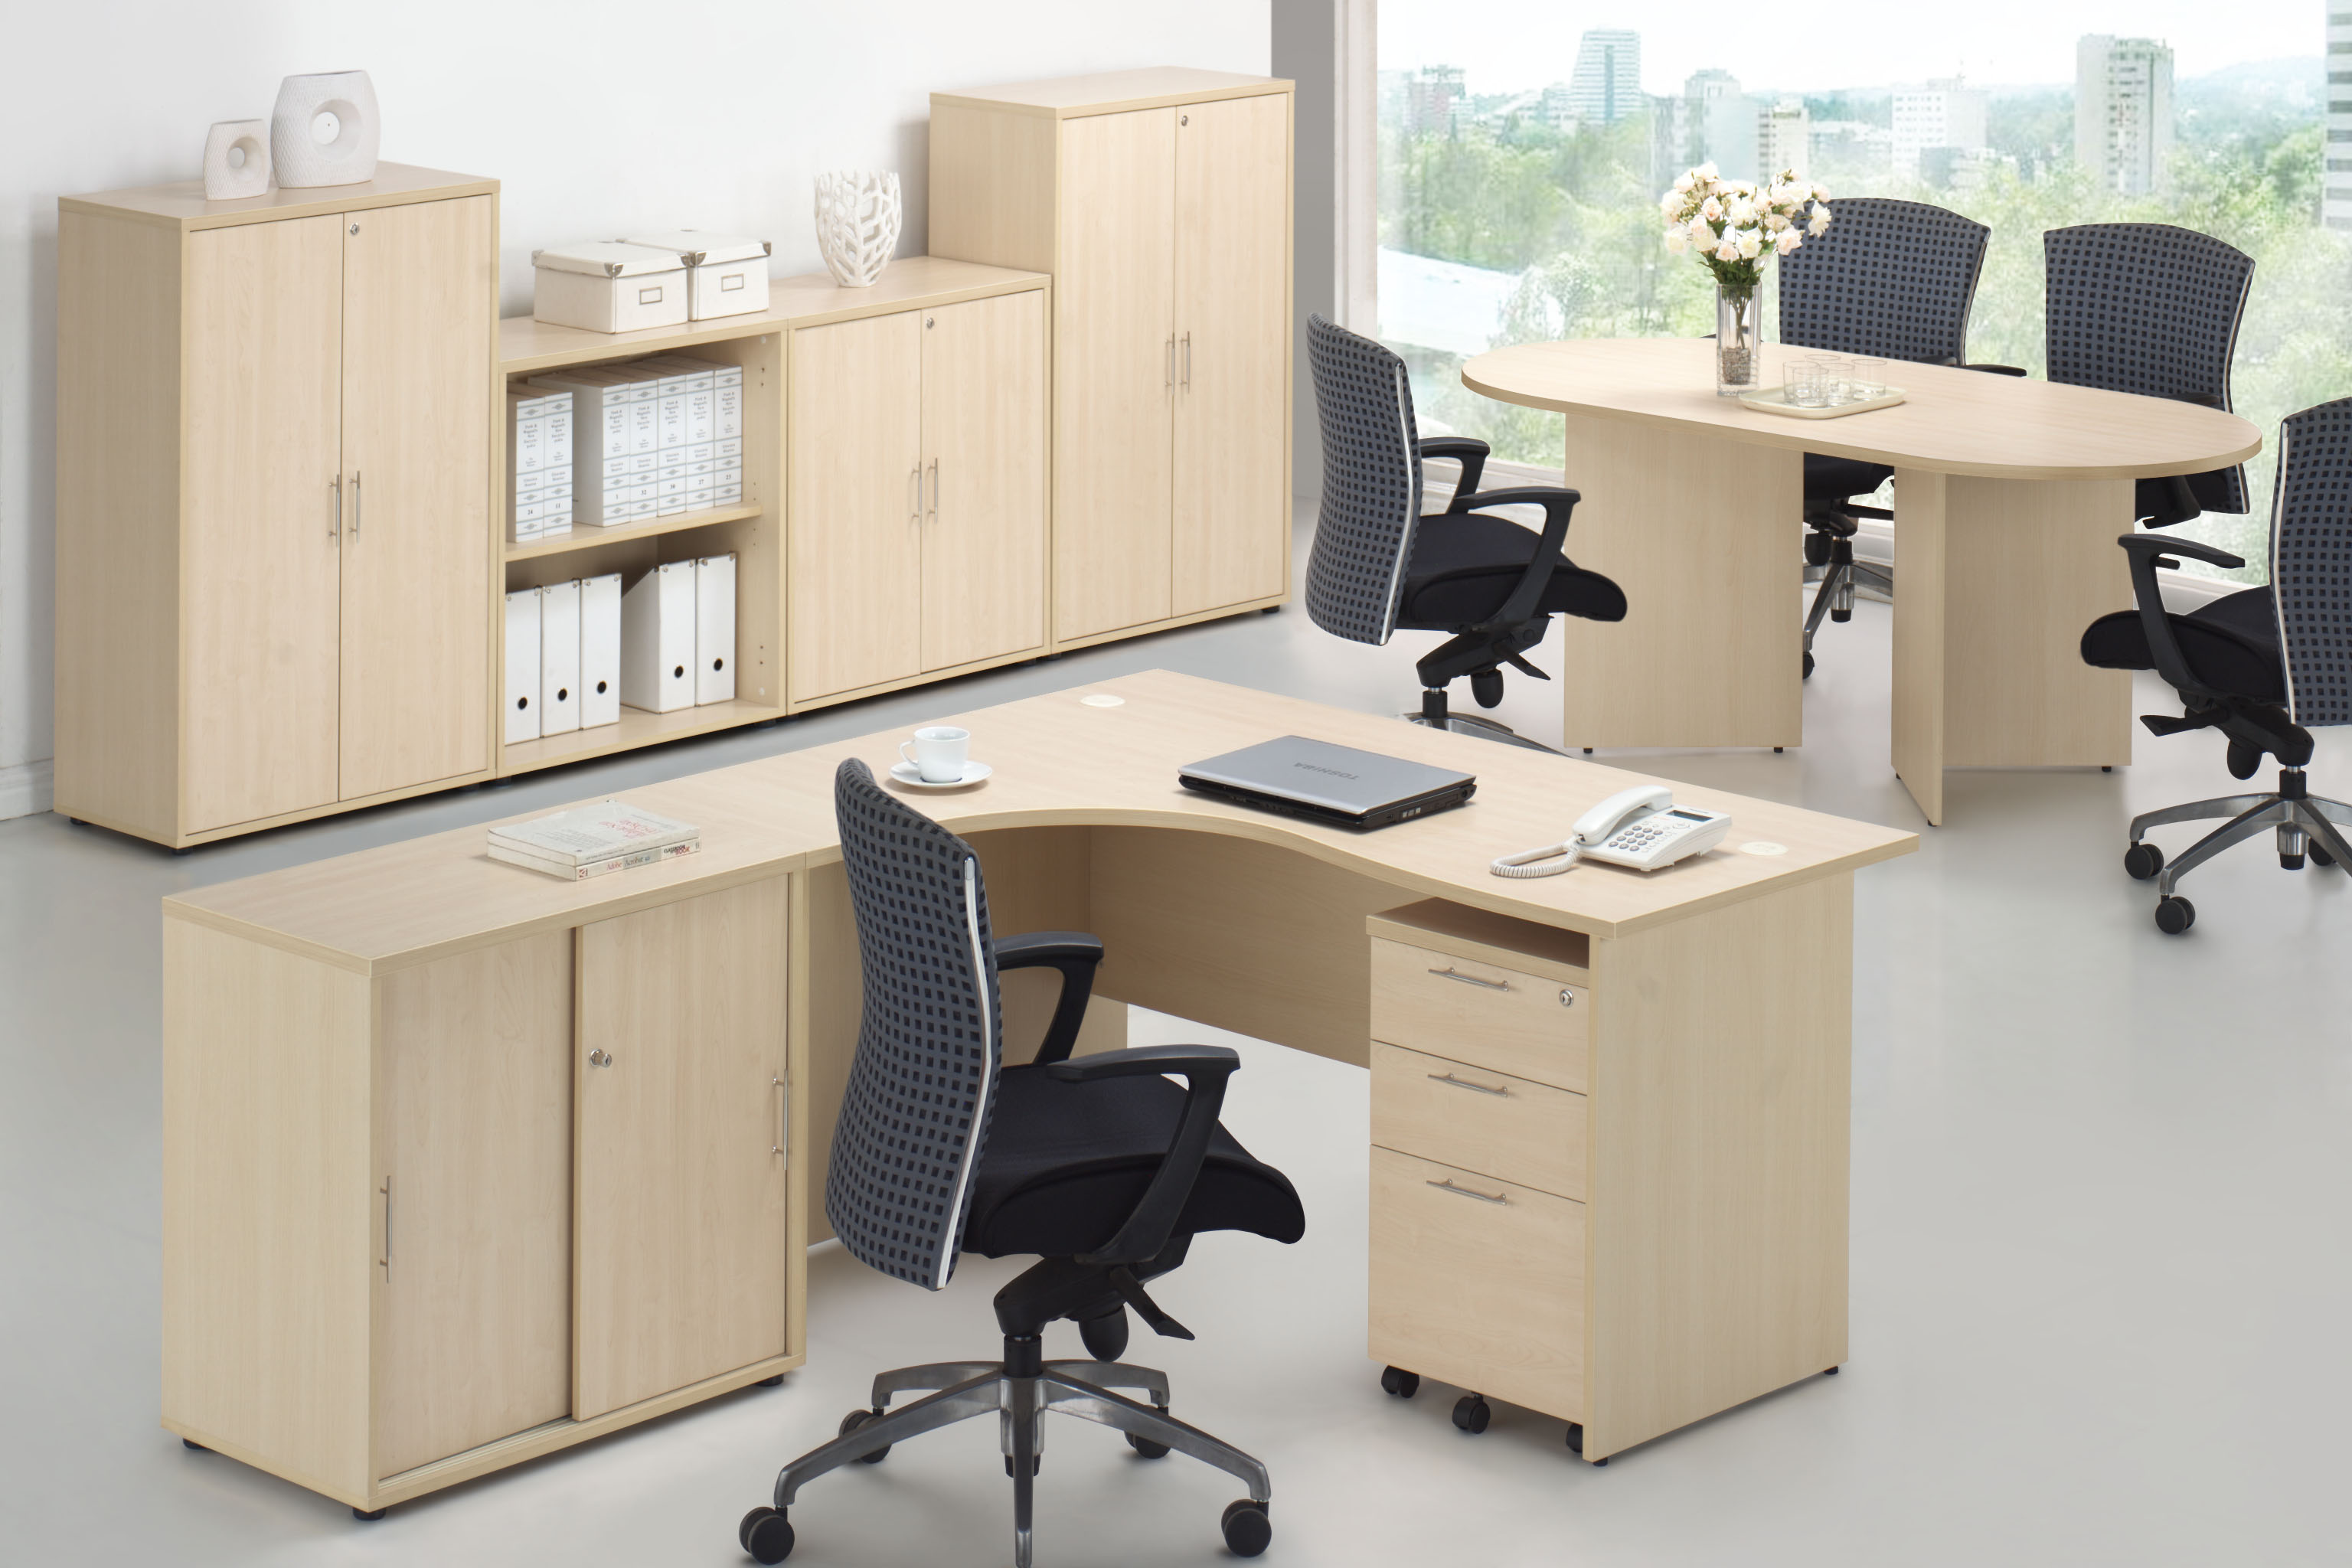 Maple wood color office furniture